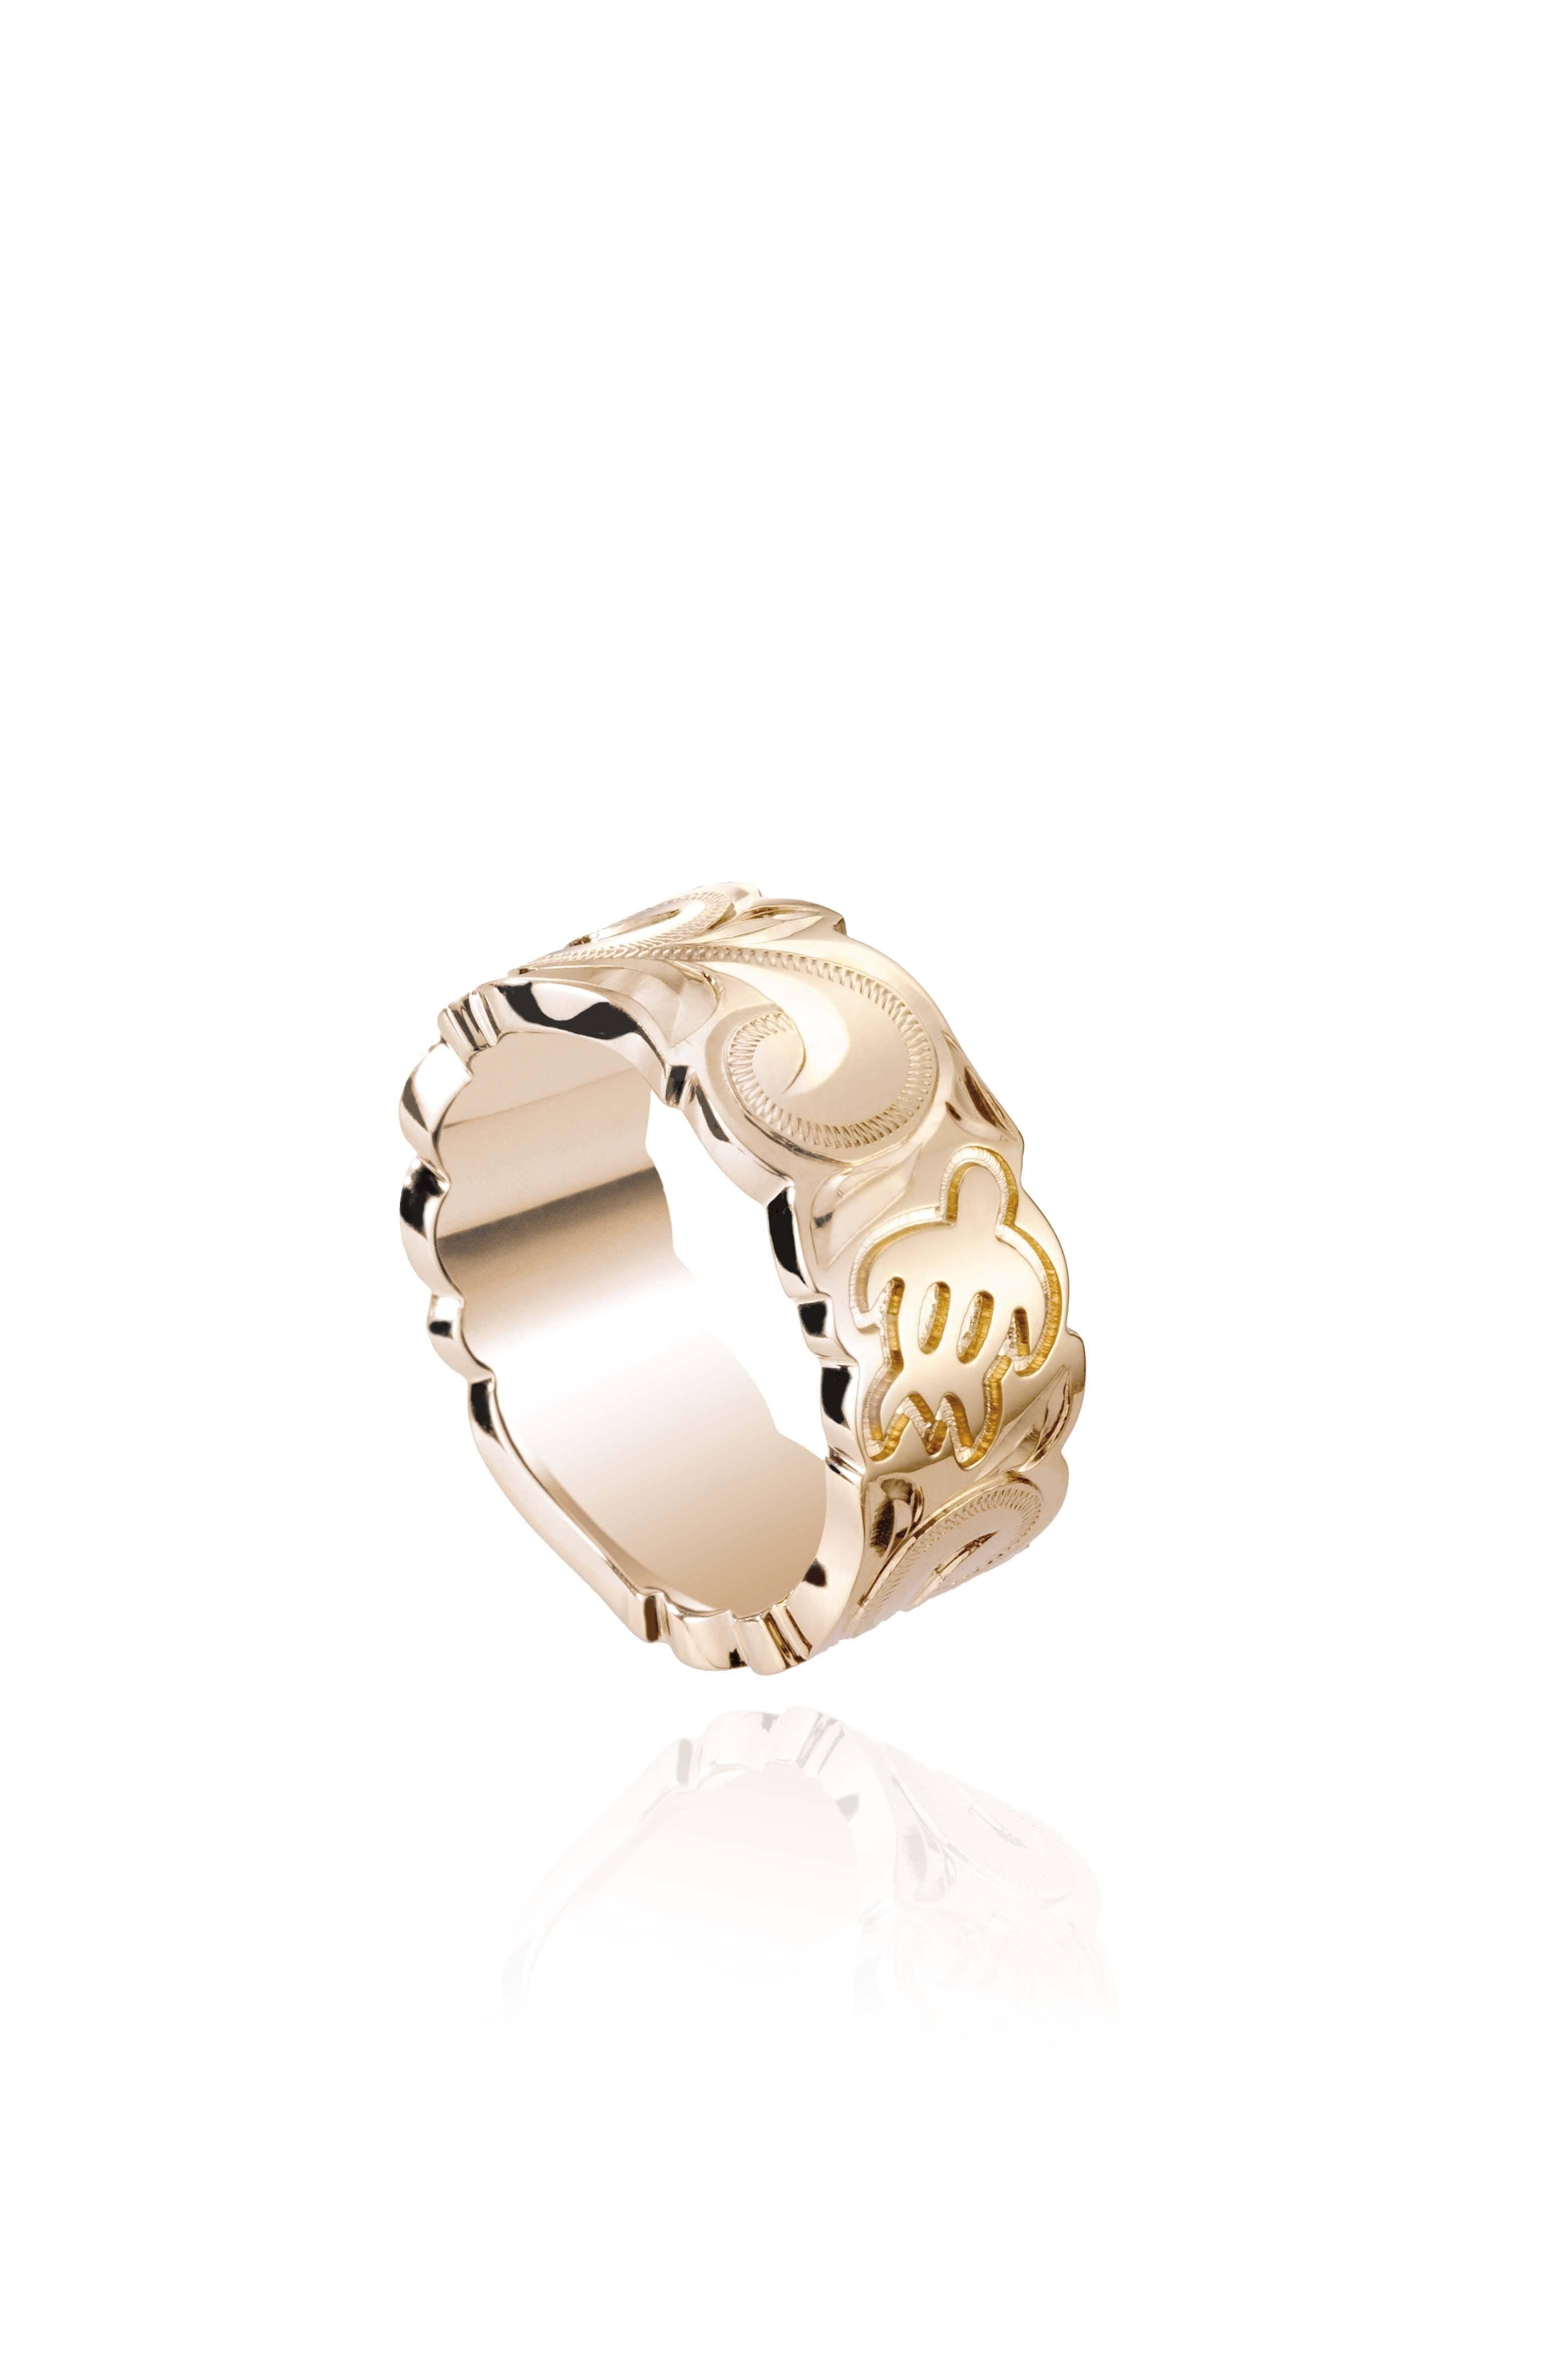 The picture shows a 14K yellow gold cut out 8 mm ring with hand engravings including sea turtles.